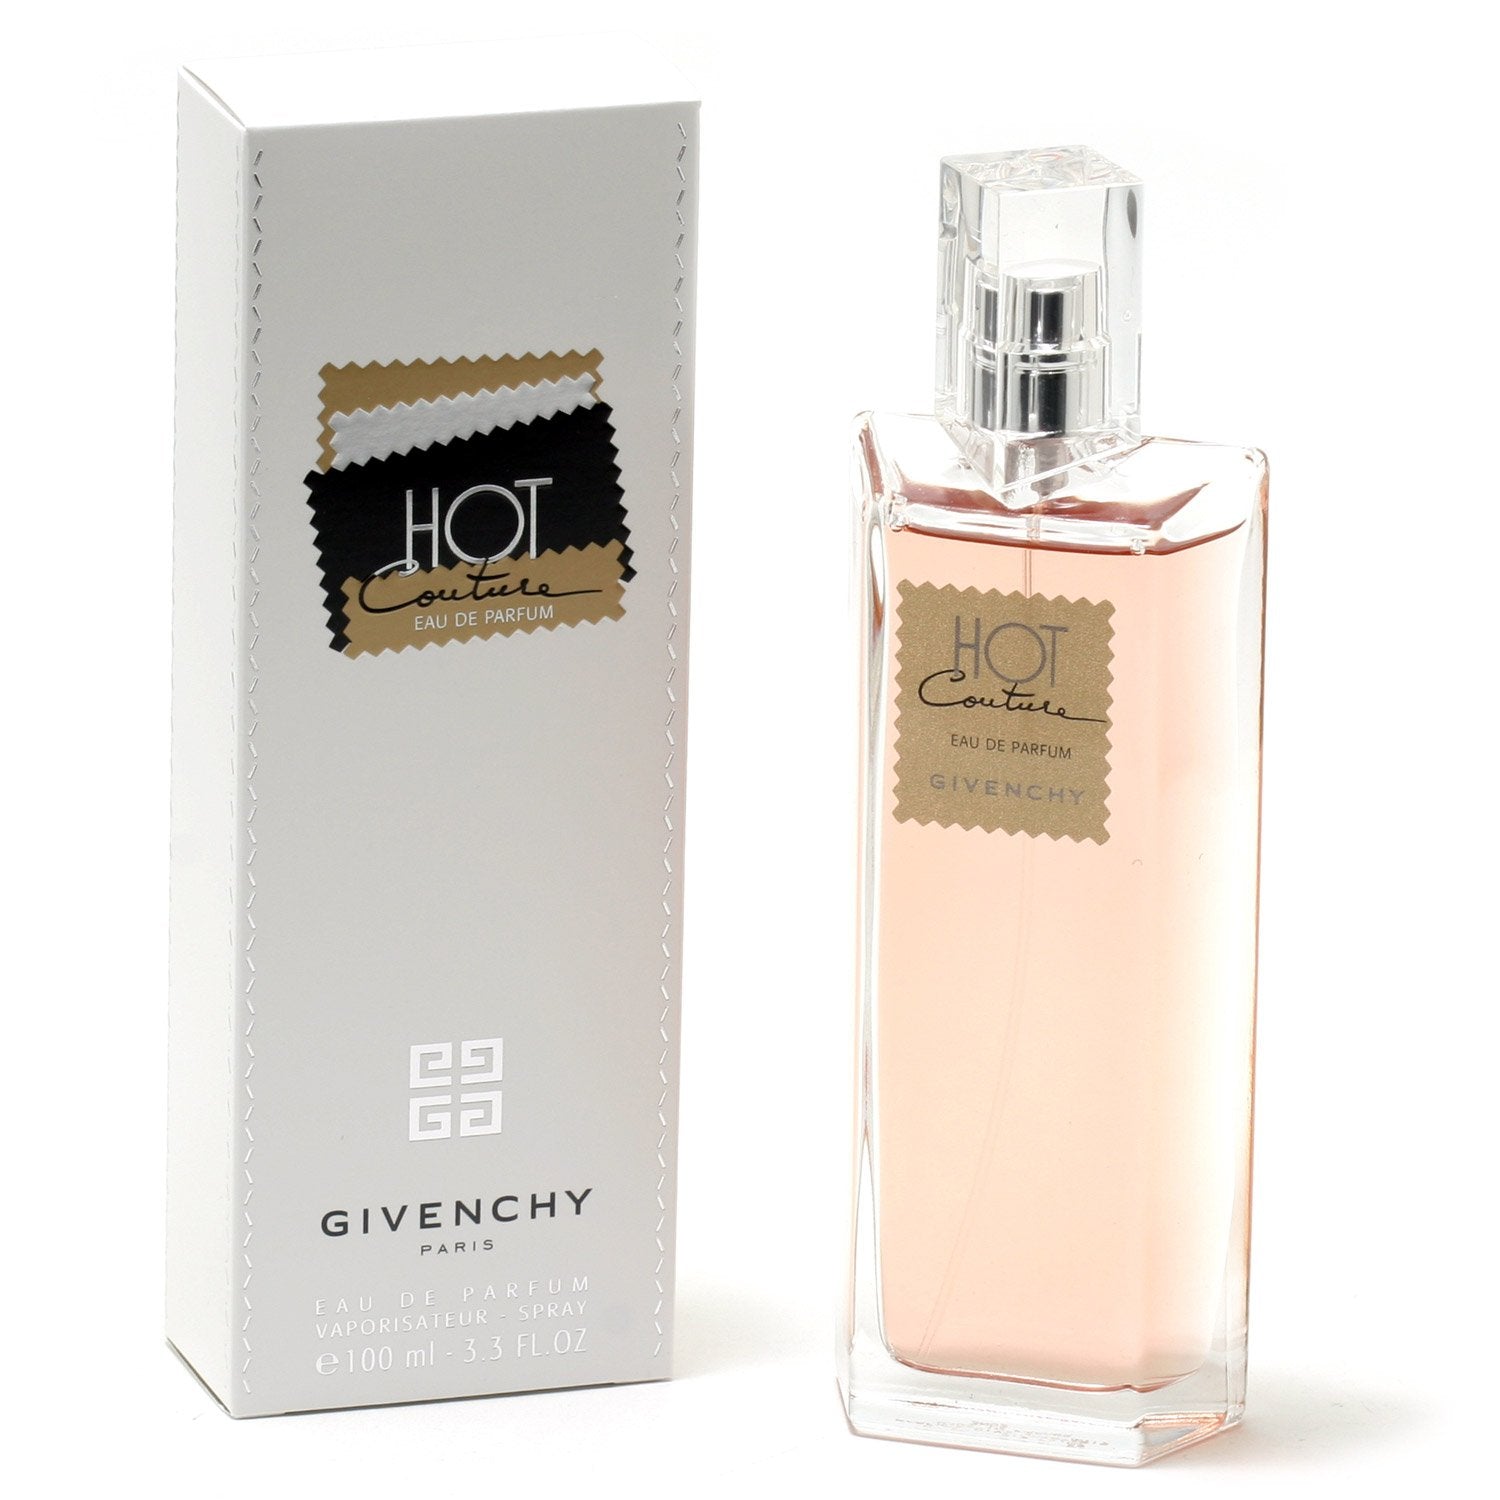 HOT COUTURE FOR WOMEN BY GIVENCHY - EAU DE PARFUM SPRAY – Fragrance Room